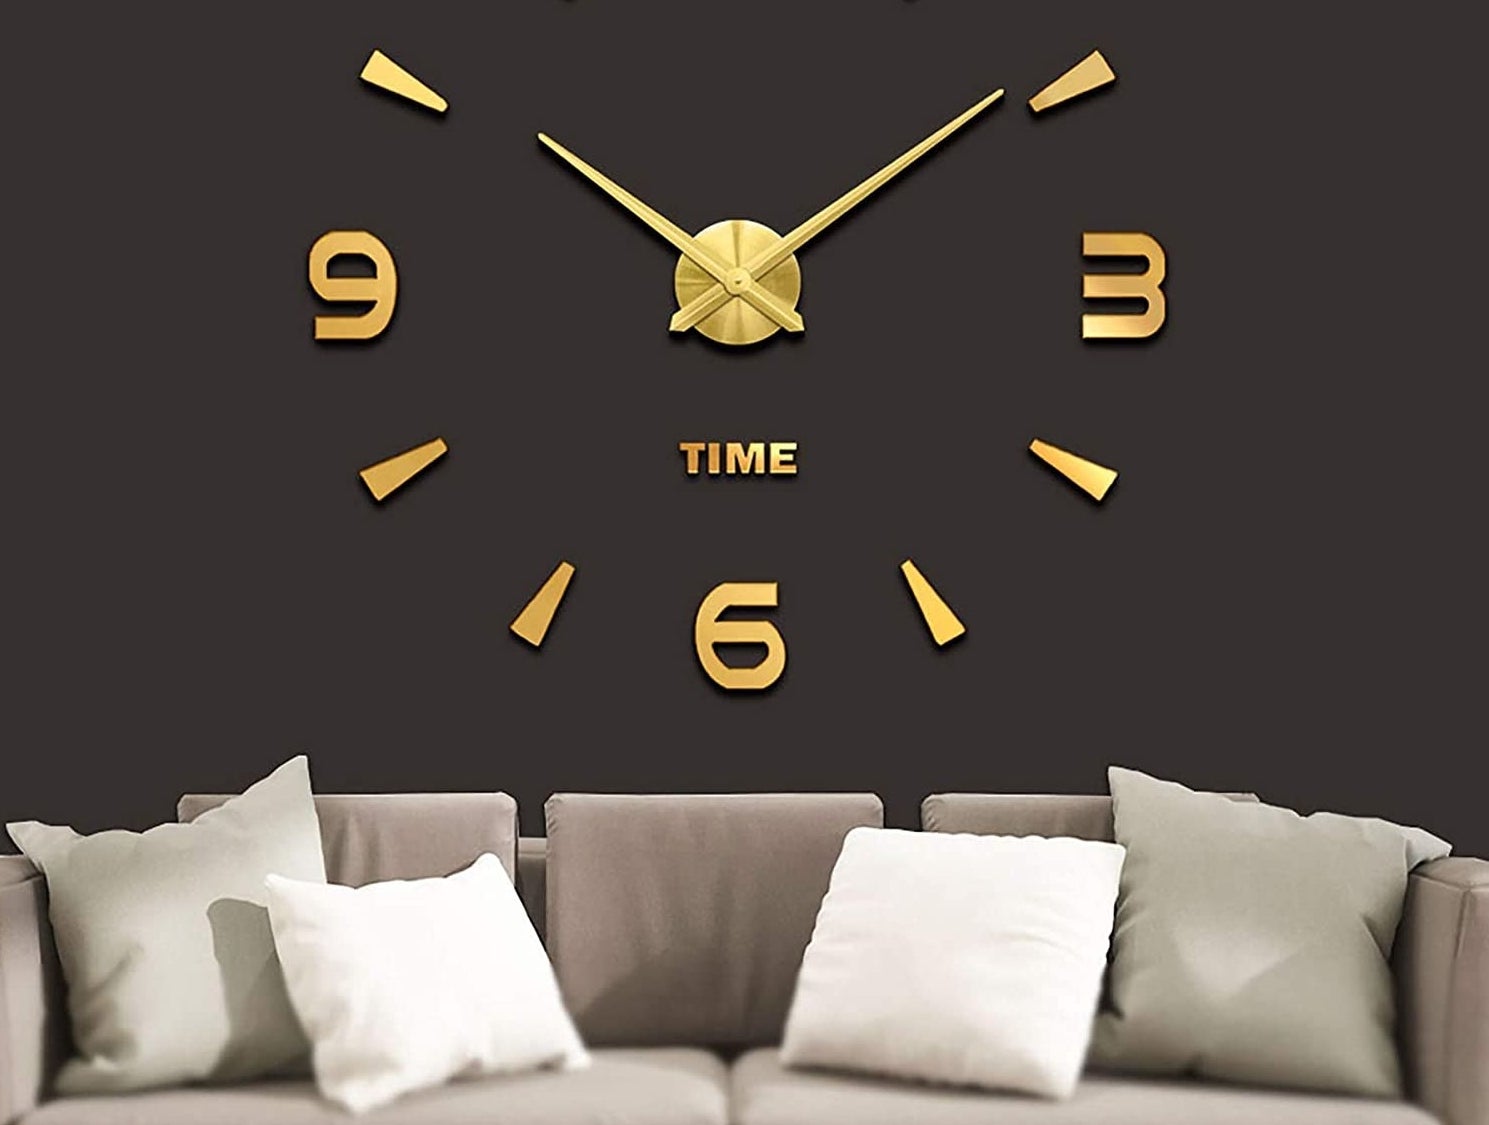 The clock mounted above a couch with four cushions on it